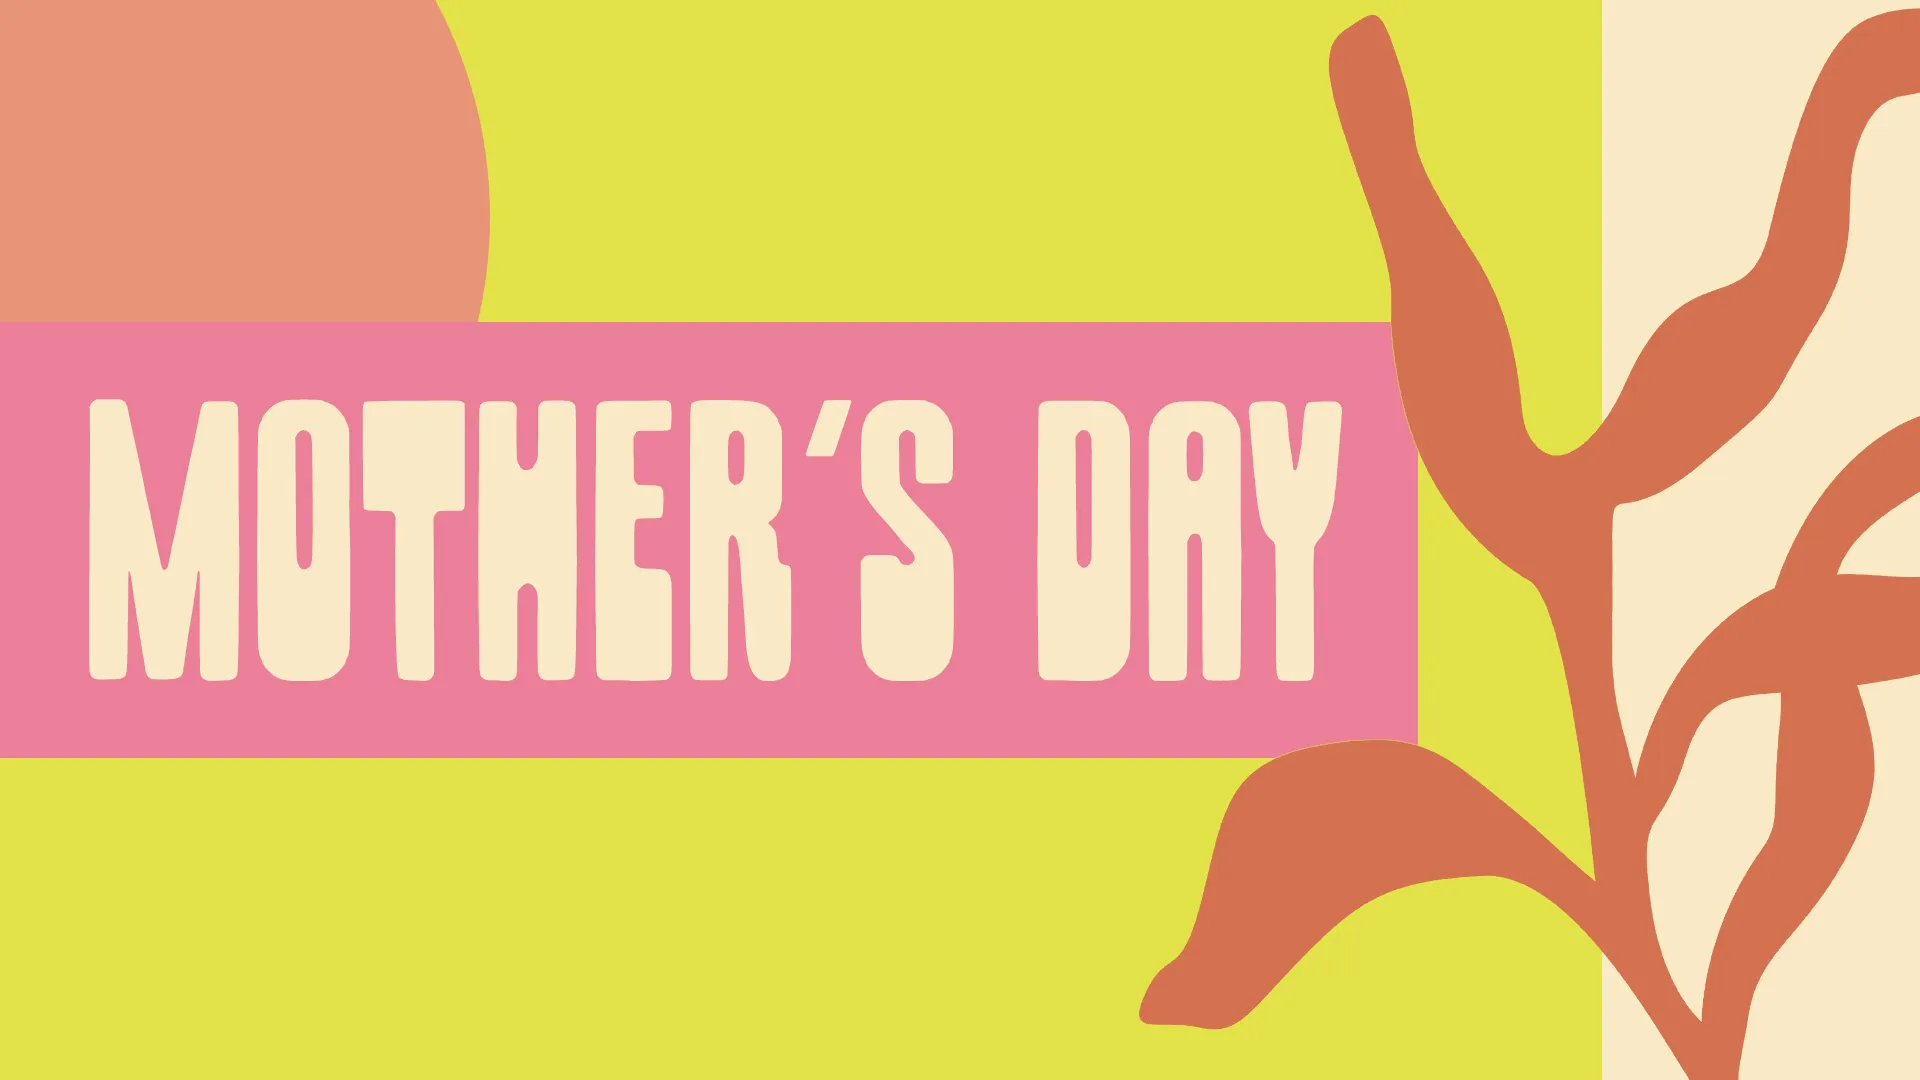 This Mother'S Day Graphic Is A Cheerful And Bold Choice, Perfect For Bringing A Warm And Inviting Vibe To Your Church'S Celebration Of All Mothers And Their Unwavering Love And Support.